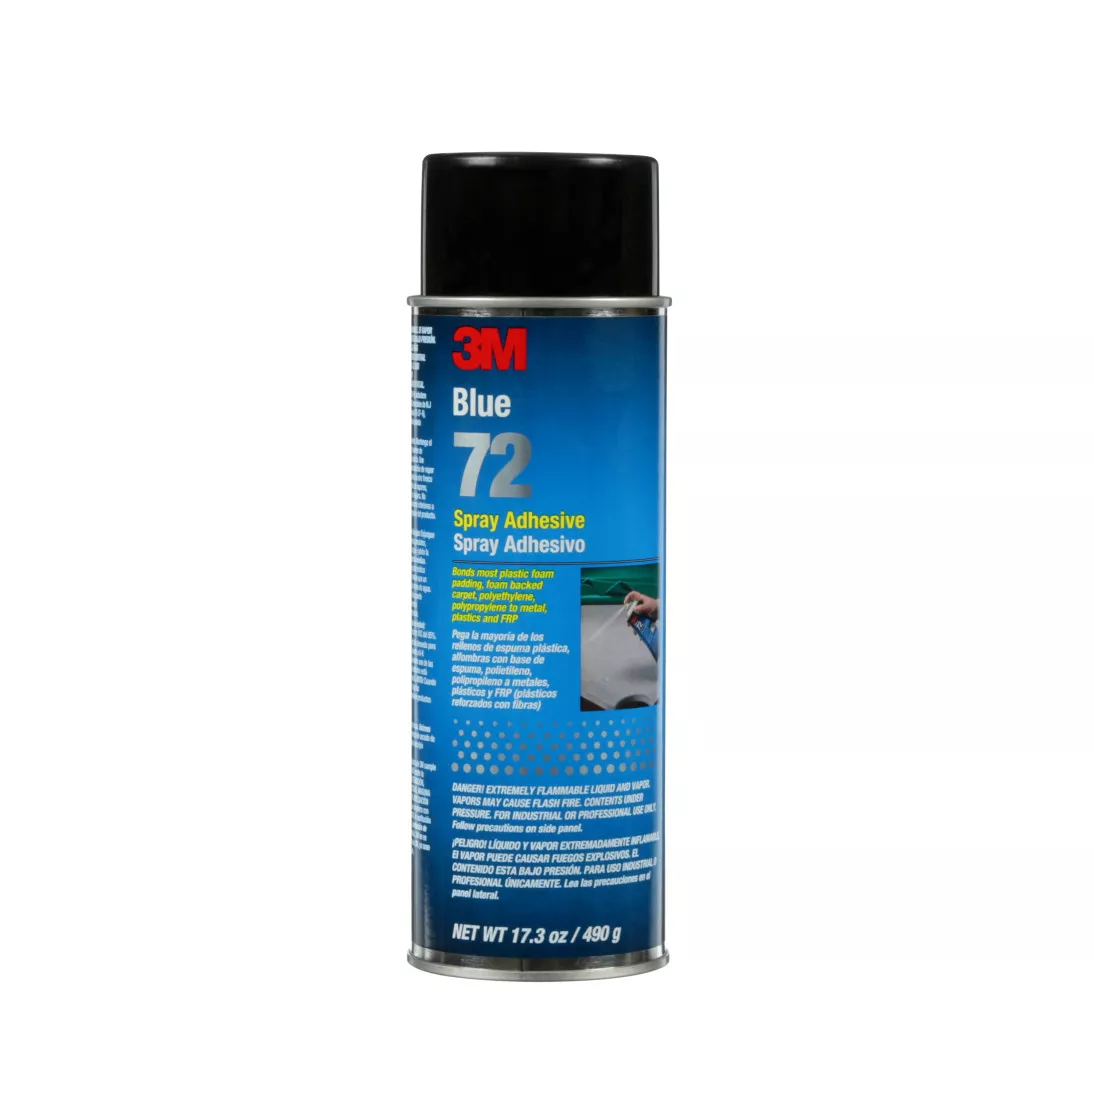 3M™ Pressure Sensitive Spray Adhesive 72, Blue, 24 fl oz Can (Net Wt
17.3 oz), 1/Case, Sample, NOT FOR SALE IN CA AND OTHER STATES